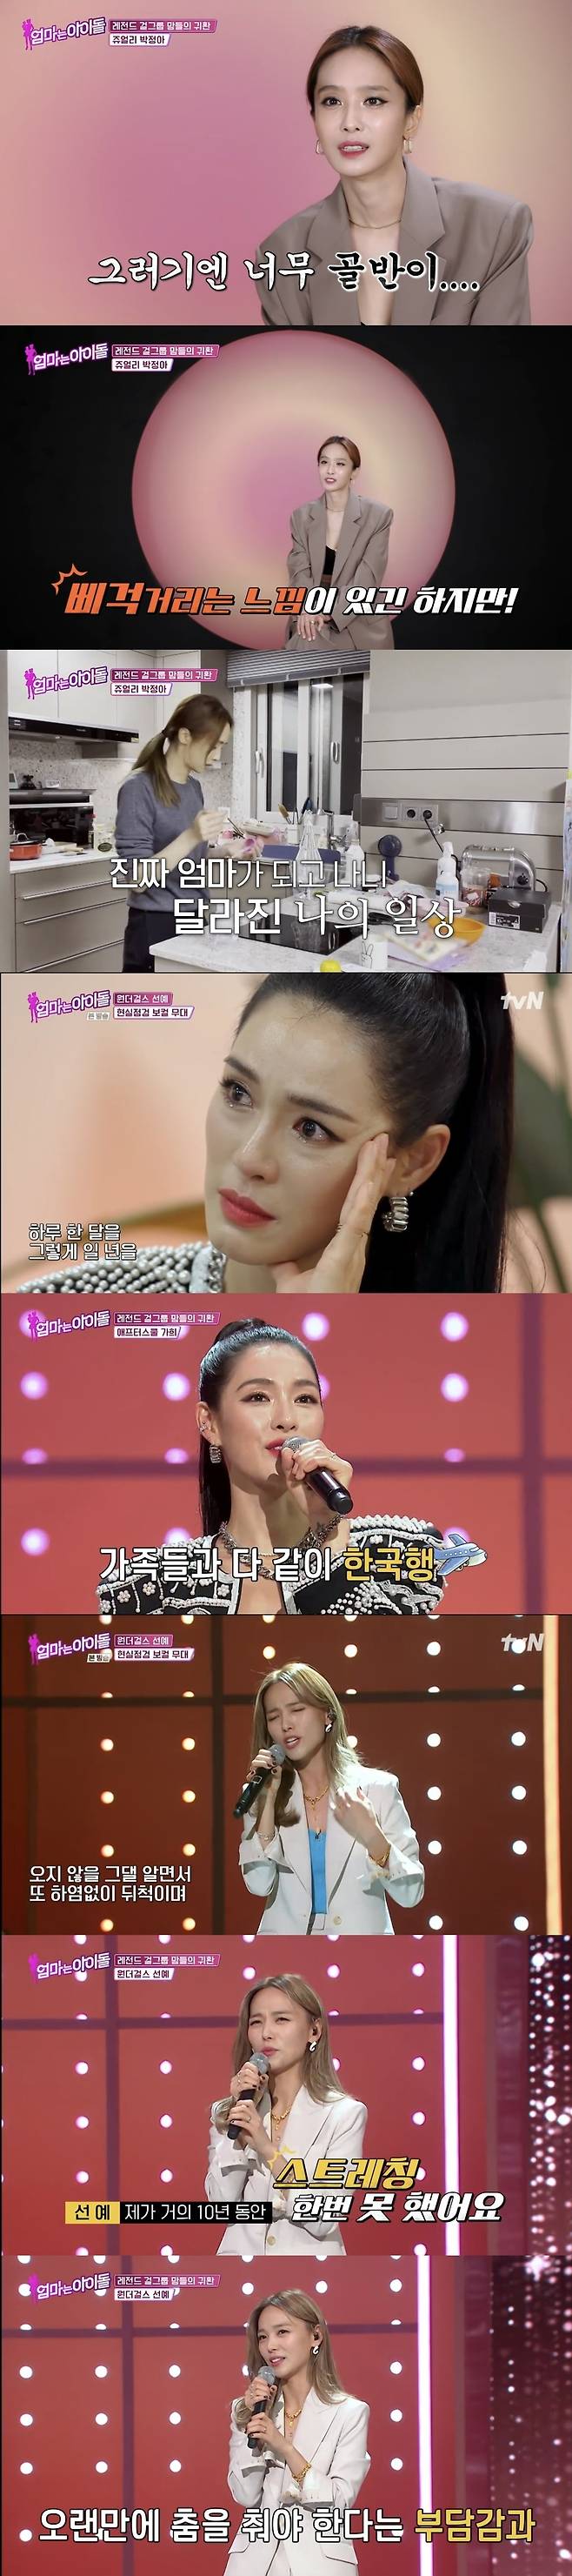 Girl group Legend Kahi, bak junga and Sunye again top Model on IdolIn the TVN new entertainment program Mom is Idol, which was first broadcast on December 10, Kahi from After School, bake junga from Jewelry, Sunyes rusty songs and dance skills from Wonder Girls were revealed.The Master, who will evaluate the ability of Top Models on this day, was accompanied by vocal trainer Park Sun-joo, Han Won-jong, composer Seo Yong-bae, Kim Do-hoon and choreographer Bae Yoon-jung.Park said, I think it should be a good thing to compete with Idol in the first year and leave this thing.Bae Yoon-jung said, I think I will see a lot of possibilities that can come up in a short period of time. It is right to talk honestly to stand on stage coolly.I think I know, Kim Jungah, come out, Park said, after hearing the hint that he was awarded the Grand Prize for Digital Sound.Bak junga said: Its a three-year car, 41-year-old parenting, although there are creaking Feelings.Ayun made his pelvis open, broke his wrist, and now he is about 16kg. If he holds it, it seems that his pelvis and waist will fall out. The birth is completely different, I did not know that I would be so devoted to my child.When I got pregnant, I said, Im going out after breastfeeding. Ive been on my side. Perfectly turned mommy. Im running out of time.What am I doing after washing dishes sometimes?When I sent it to school, I arranged it, and when I was in the House, I put it to sleep, ate dinner, and washed the dishes at the end of Haru.I think I had a good time in the past. I want Ayun to think of her as a nice person. Bak Junga presented the perfect stage by selecting Jewelry Superstar as a vocal evaluation song and Shiny Lee Tae-mins Move as a dance evaluation song.Park Sun-joo praised Lee Tae-min is my student, and I have seen dancing since I was a child, but Kim Jungah dances and Lee Tae-min is forgotten.Lee Chan-won said, I think that the song is a singer specializing in vocals, but the prejudice is broken. I was so excited.Bae Yoon-jung said, In fact, this choreography is very difficult. I think slow songs will be easier than fast songs, but it is difficult to make Feelings.As I went back, I noticed a lot of lack of strength and strength. As vocalist The Master said, it is so the same as 10 years ago and now. Vocal and dance ability tests showed that the bake junga received medium in both areas.Composer Kim Do-hoon said, Do you remember me? I worked on a solo album and I had a long time recording, and I was a Jewelry fan too.I am glad to be so glad and courageous now, and I am more impressed than I expected. Seo Yong-bae also said, I am a Jewelry fan, but I seem to have hidden my strength.I think you will show a better picture. Kahi, who had raised two children in Bali, Indonesia, said, It seems that the lifestyle has been changed mainly for real children. When I wake up in the morning, I went to the kitchen and set up breakfast.I didnt look up the stage on purpose. I want to keep doing it. But I cant anyway.I have an age, a child, and I do not dare to think that I miss the stage. I met with the members of the Civilization Express After School for a long time and went back to the stage of my life without a circle.I can not shine like a child, but I will be Kahi who is a mother but also good at the stage. Kahi showed Jesse What X in the vocal evaluation, and Park Sun-joo said, I was so sorry that Mr. Kahis song was over.Han Won-jong praised I think these days are not the time to sing well, but the time to make the song attractive.Kim Do-hoon Everyone here will feel the same, but I am perfectly equipped with the hottest girl crush these days, not to mention Force and Aura.Kahi then performed the perfect dance to Black Pink Lisa LALISA.Sunye, who moved to Canada after marriage in 2013, said, I did not have more opportunities because I was not in Korea, and I had no time to give birth to children in three years.I was soaked in my normal mothers life. I thought I was already used to her life.Canada has to pack a lunch box, pack a lunch box, send a childrens school bag, and spend time with the youngest, and I am sending a normal Haru. Sunye said, I think there was a little excitement, I was worried, and I thought I could do it.Once the qualifications were mother, the special qualifications for only mother to appear were interesting and more courageous: I came alone for many reasons because of the problems with my childrens school.I feel so nervous and arrogant, I feel nervous, I can expect and I am excited. Sunyes most worrying was dance, which he said: I havent had a stretch in 10 years.Since I am not a good dancer, I was burdened with dancing for a long time, and it included a part of my appearance that changed a lot.Now that I am a mother, I put everything down and Top Model. Sunye sang a song Waiting for fans who waited a long time, and the evaluation team shed tears of emotion, and danced to BTS Butter.Kim Do-hoon praised the reason as I do not know why, but it is very elegant and hip, and now I do not have to do the evaluation and I want to see it again.Sunye was delighted to receive the award rating on both vocals and dance.